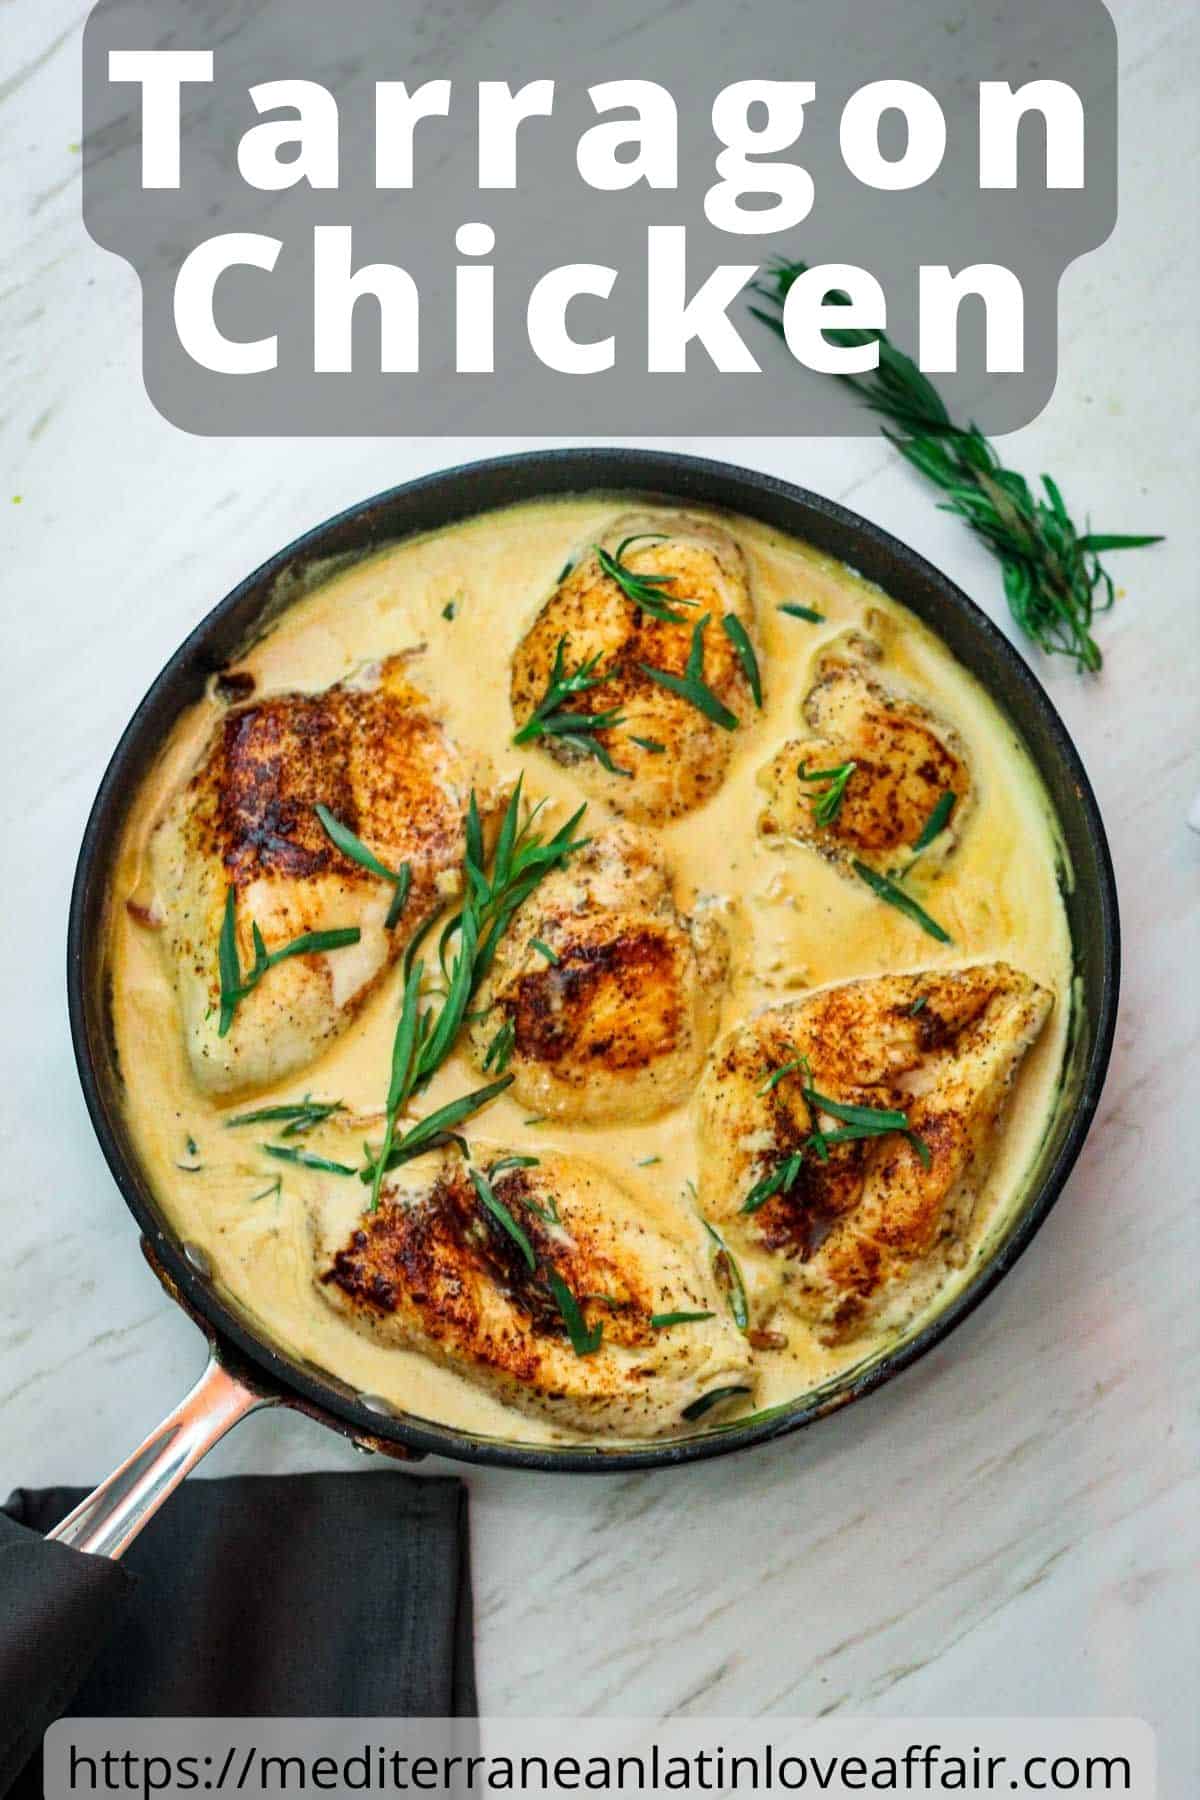 An image prepared for Pinterest. It shows a picture of Tarragon Chicken in a white wine sauce with cream and dijon mustard. Picture has a title bar on top and a website link at the bottom.